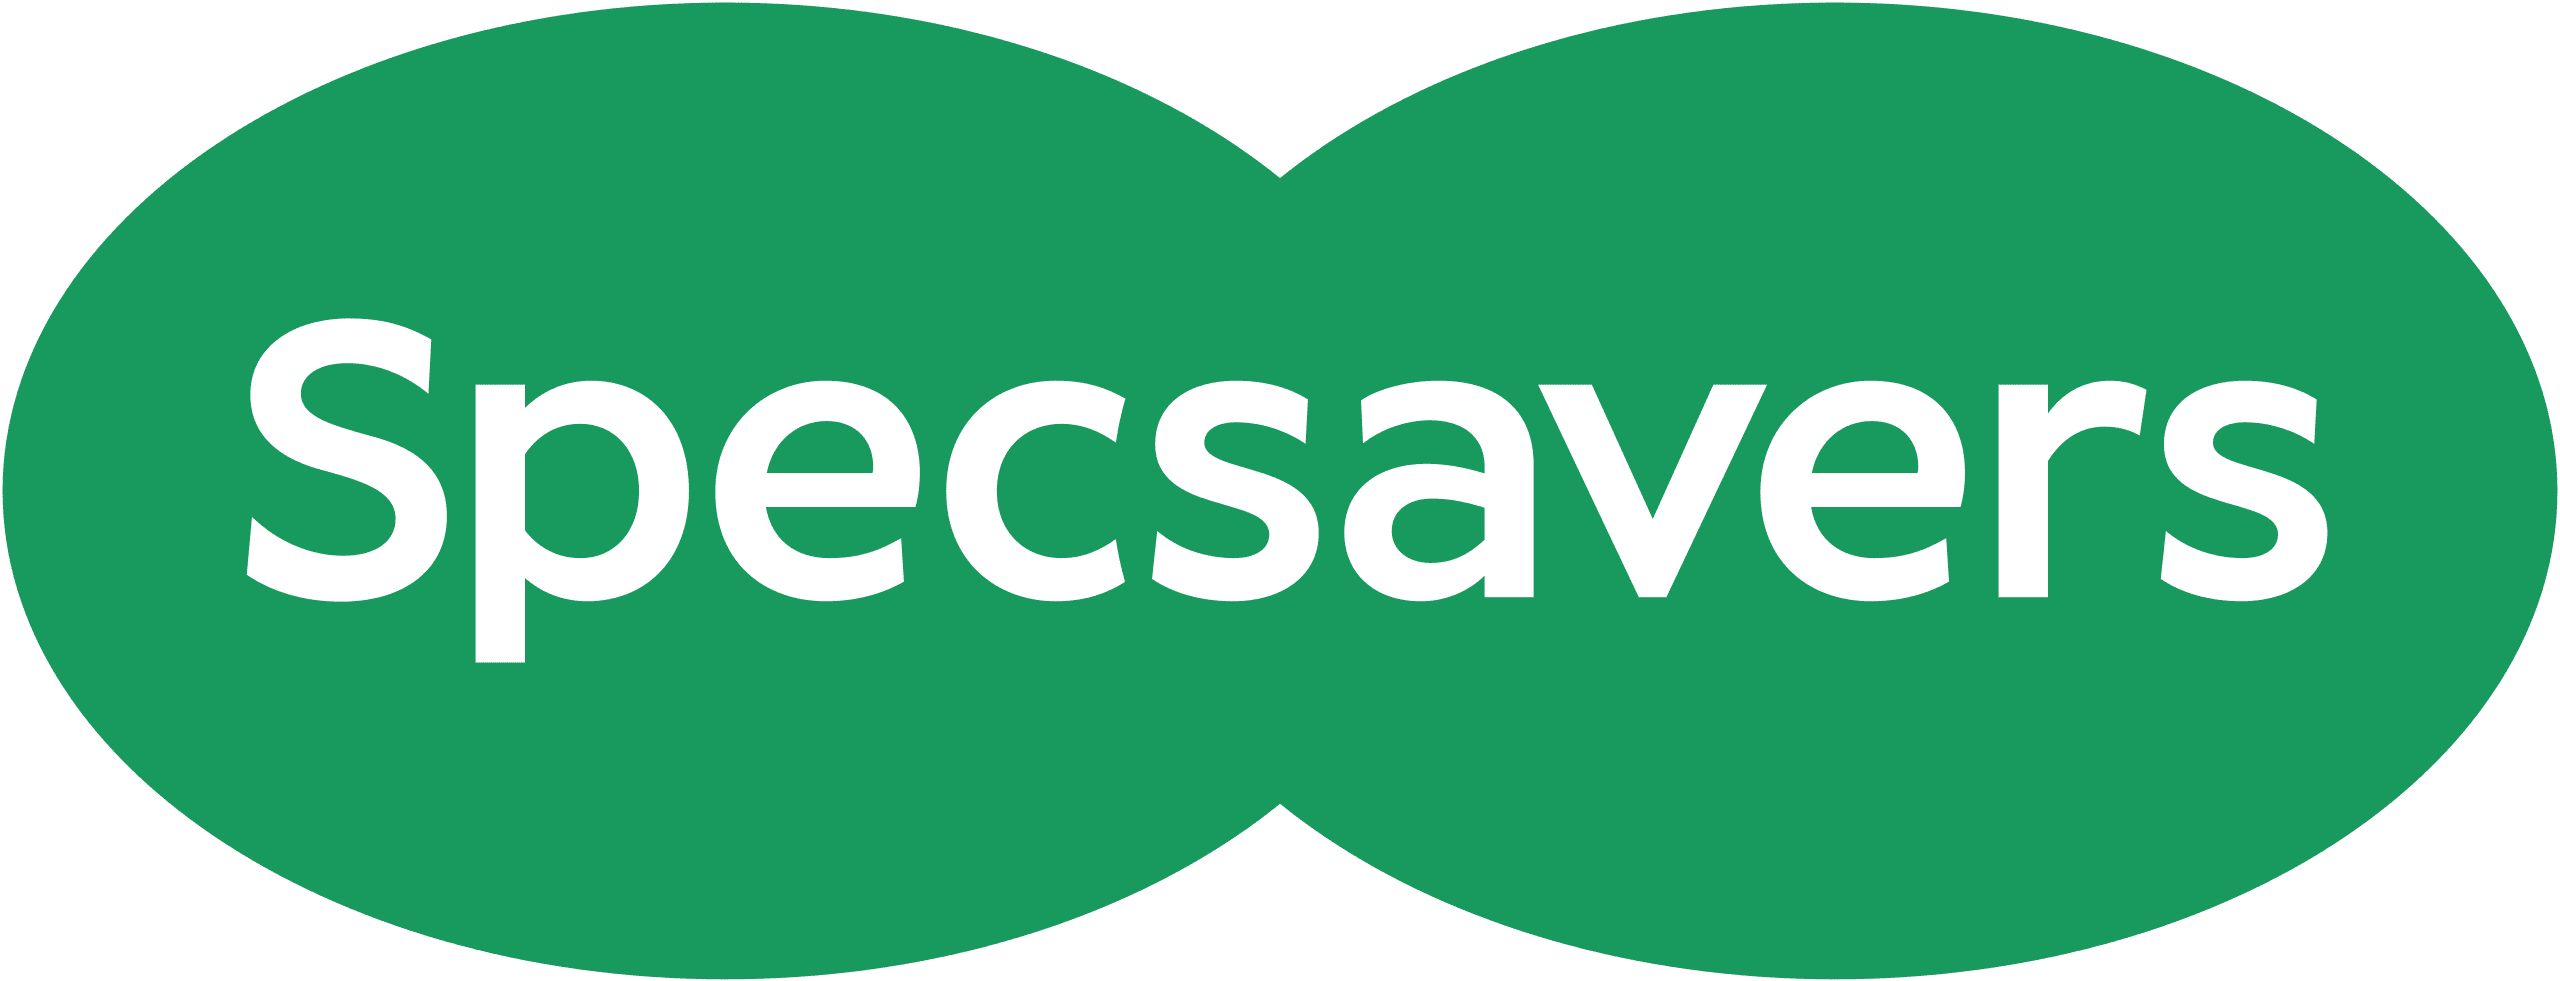 Logo of Specsavers featuring white text on a green background shaped like stylized glasses.